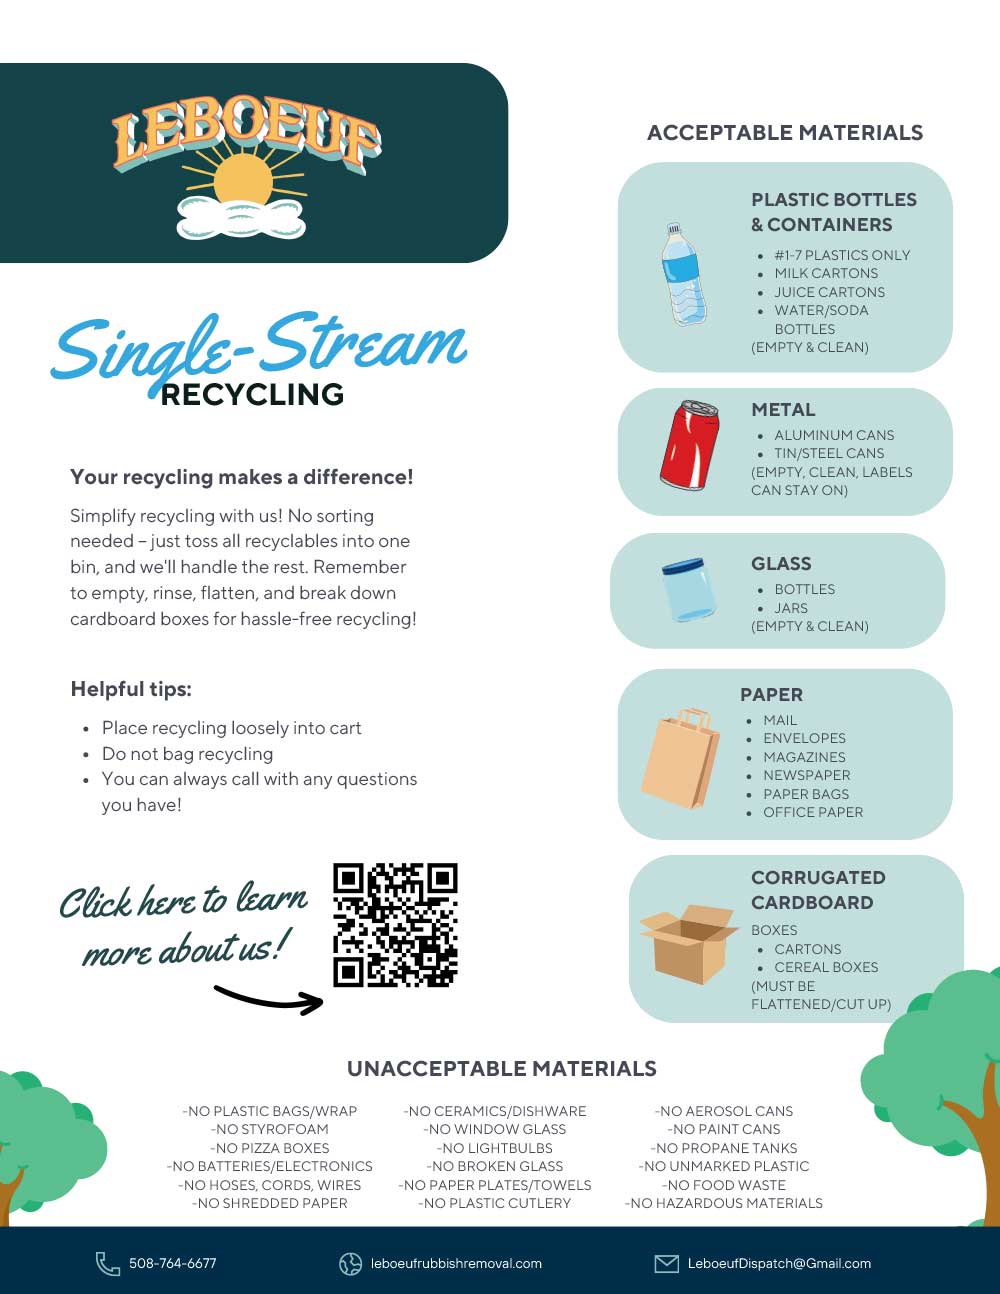 A flyer for LeBoeuf single-stream recycling, with allowed recyclables, tips, and links to more information.